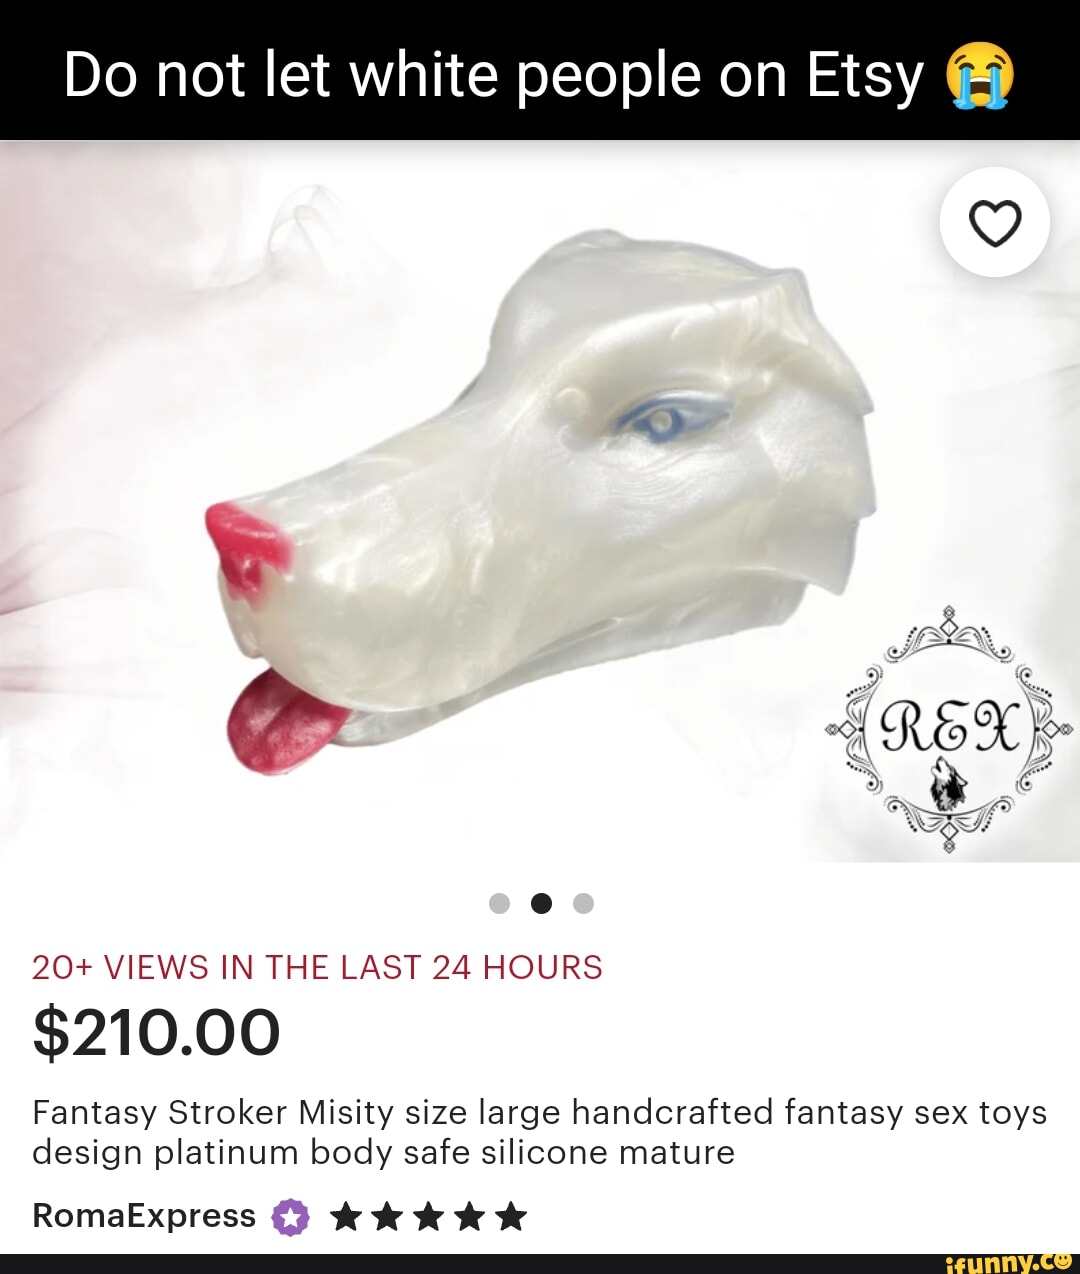 Do not let white people on  20+ VIEWS IN THE LAST 24 HOURS $210.00  RomaExpress Fantasy Stroker Misity size large handcrafted fantasy sex toys  design platinum body safe silicone mature - iFunny